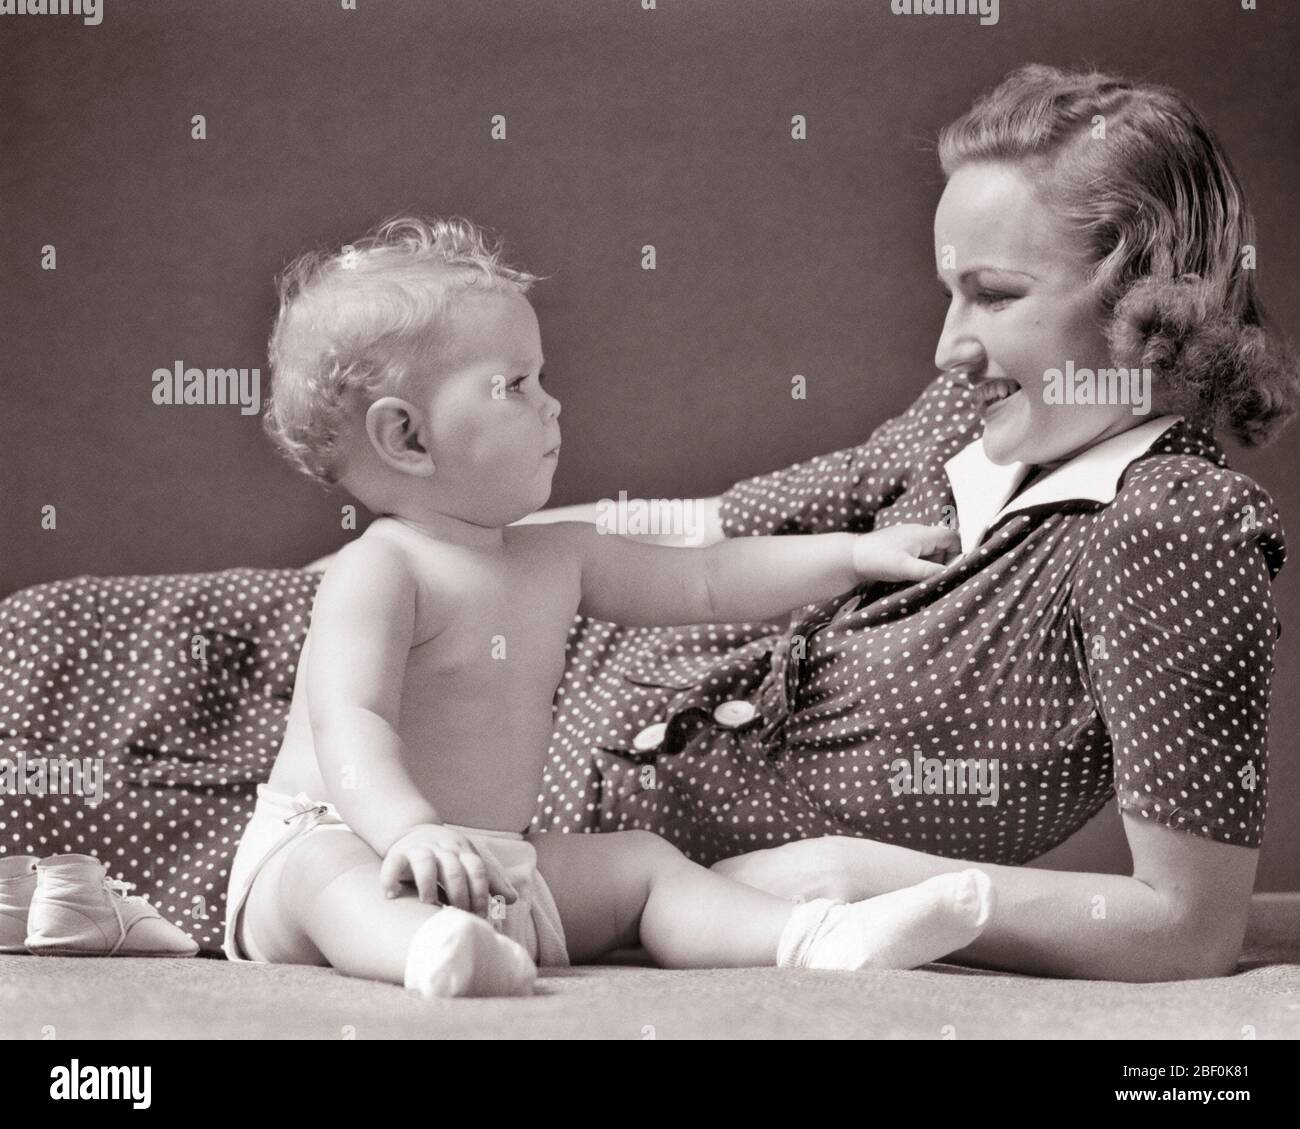 1930s 1940s BLONDE BABY GIRL IN CLOTH DIAPER SITTING UP REACHING OUT TO TOUCH SMILING RECLINING MOTHER WEARING POLKA DOT DRESS - b1631 HAR001 HARS INFANT TOUCH STRONG PLEASED FAMILIES JOY LIFESTYLE SATISFACTION FEMALES STUDIO SHOT HEALTHINESS HOME LIFE COPY SPACE FRIENDSHIP HALF-LENGTH LADIES DAUGHTERS PERSONS CARING B&W DOT HAPPINESS CHEERFUL DISCOVERY POLKA POLKA DOTS PRIDE UP REACH SMILES CONNECTION POLKA DOT JOYFUL STYLISH PERSONAL ATTACHMENT AFFECTION EMOTION GROWTH JUVENILES MOMS TOGETHERNESS YOUNG ADULT WOMAN BABY GIRL BLACK AND WHITE CAUCASIAN ETHNICITY HAR001 OLD FASHIONED Stock Photo